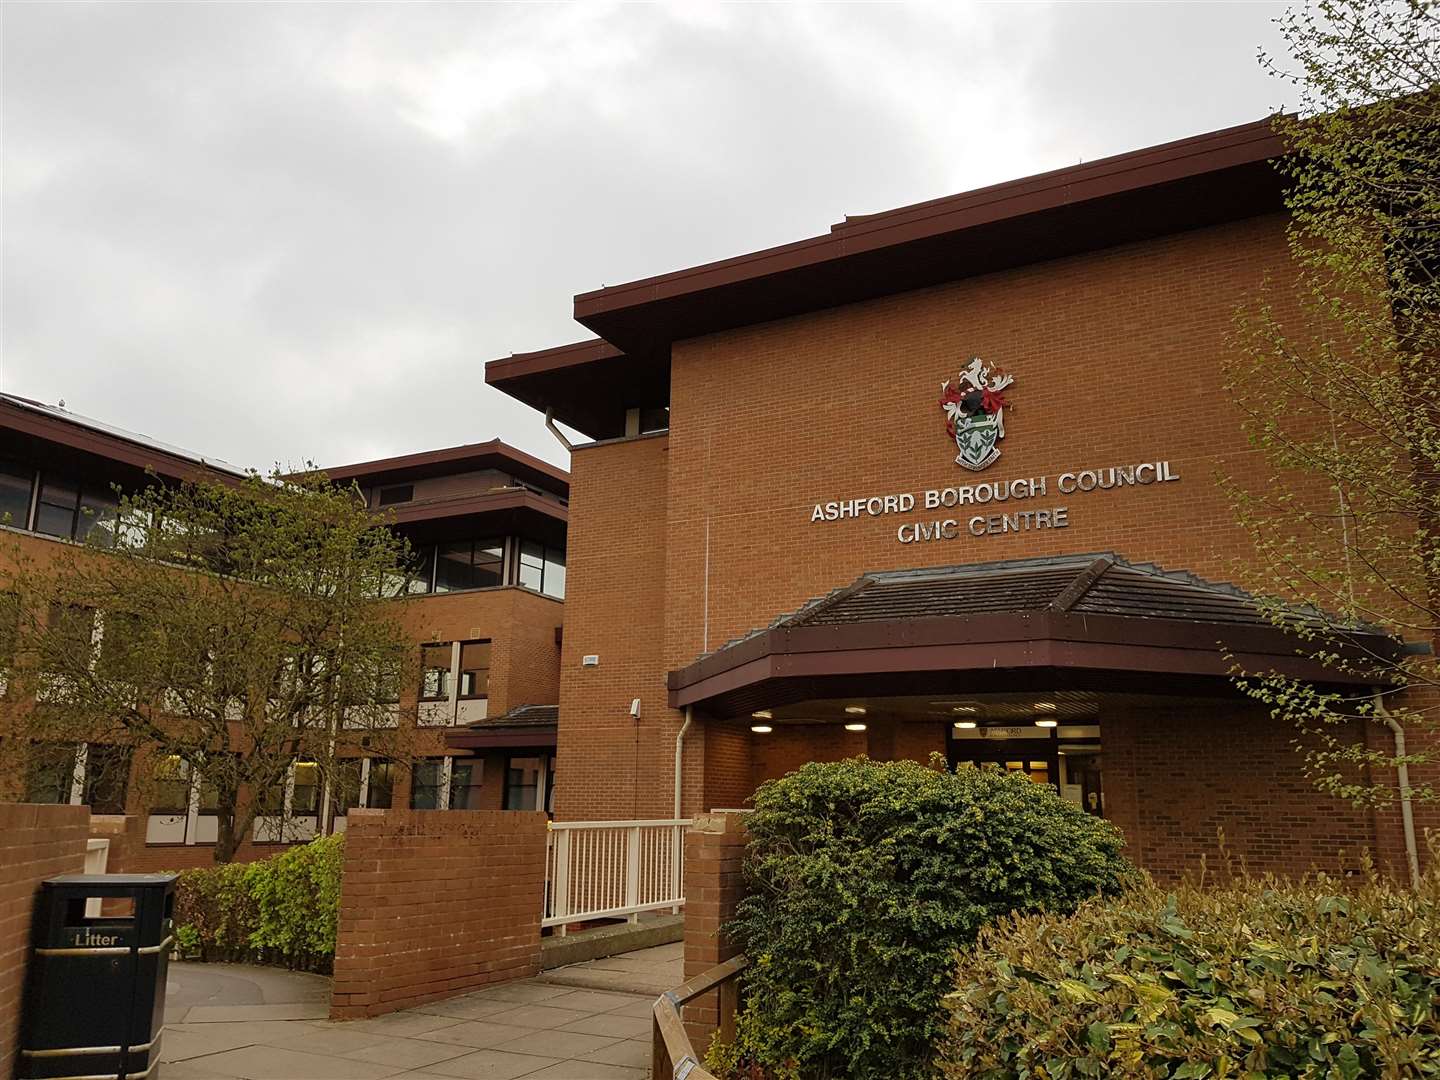 The public is still invited to attend the meeting at Ashford Borough Council's Civic Centre